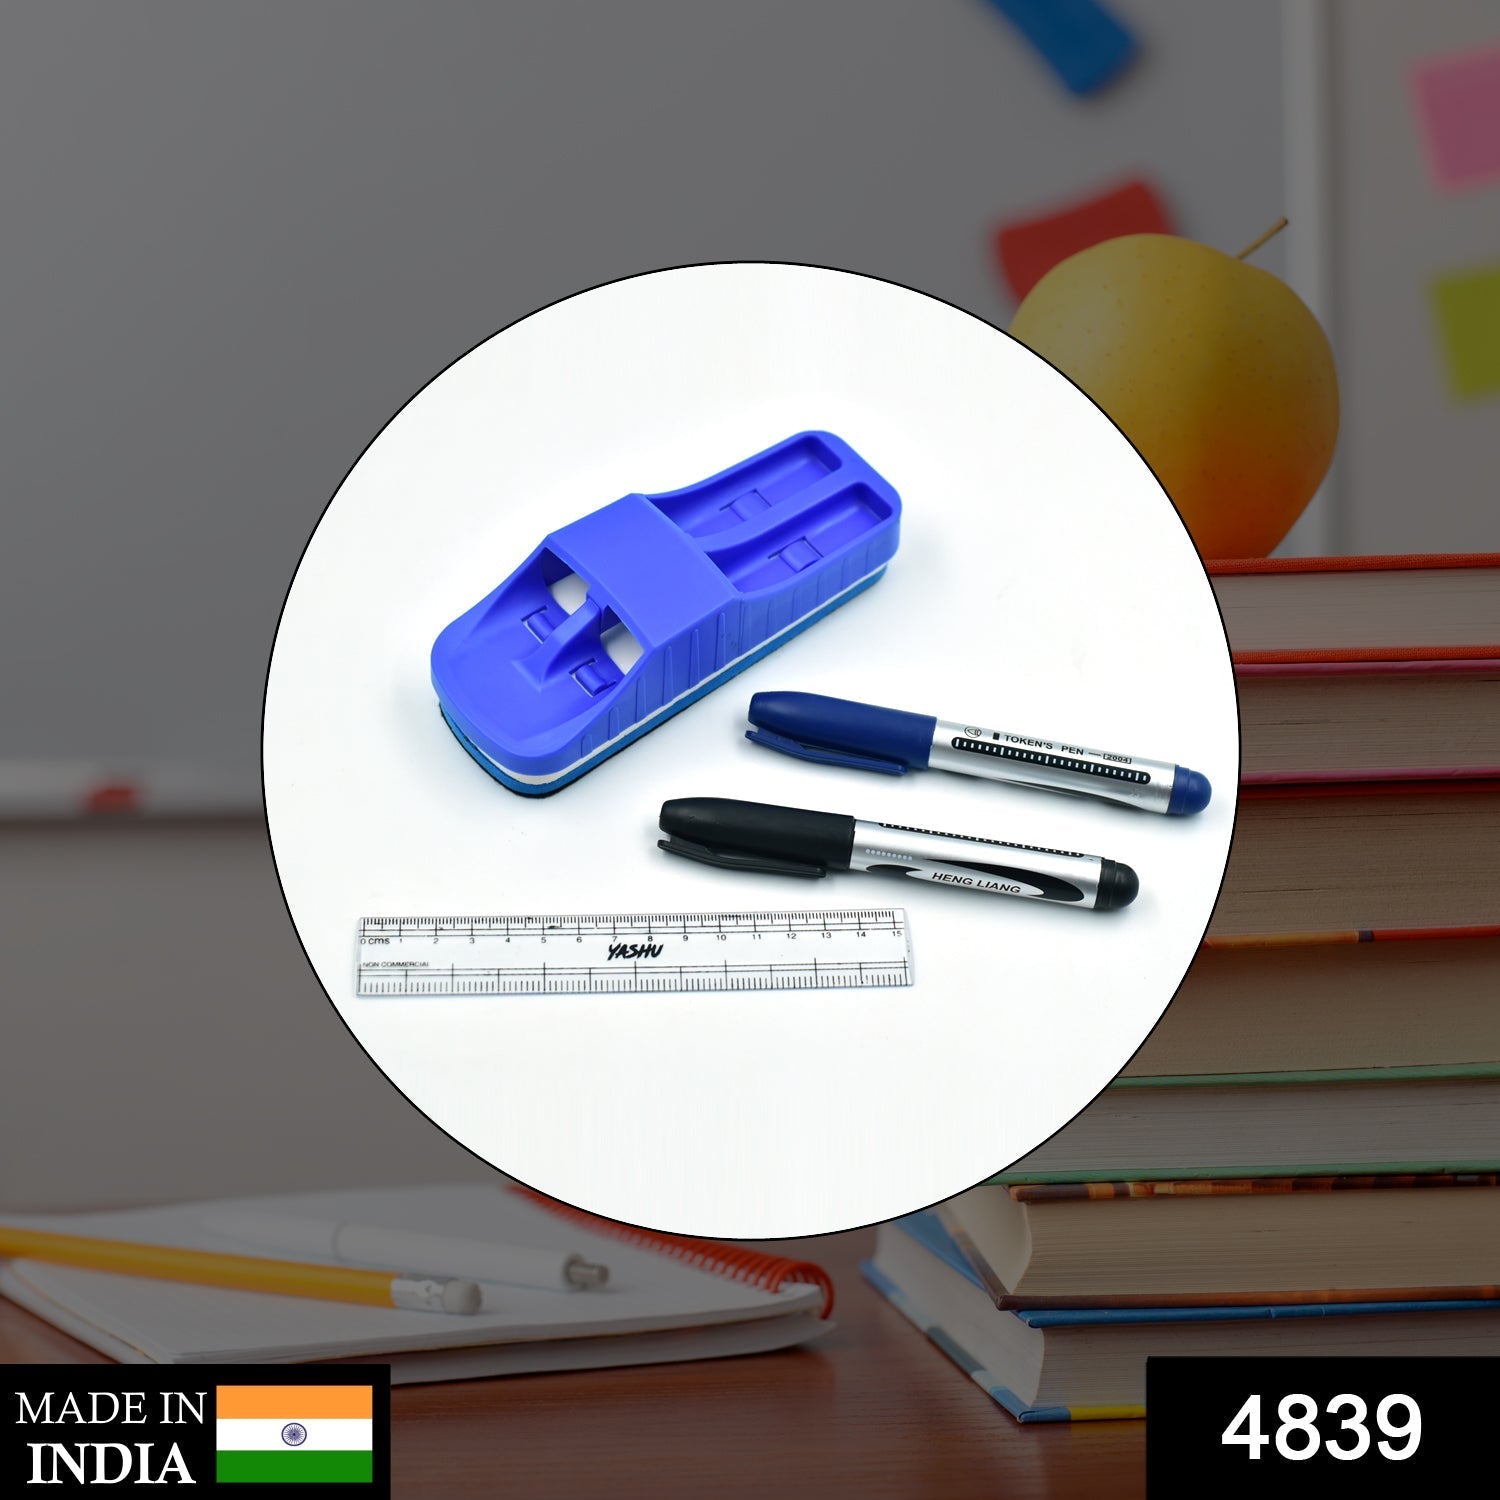 4839 Duster Ruler And Marker Used While Studying By Teachers And Students In Schools And Colleges Etc. DeoDap